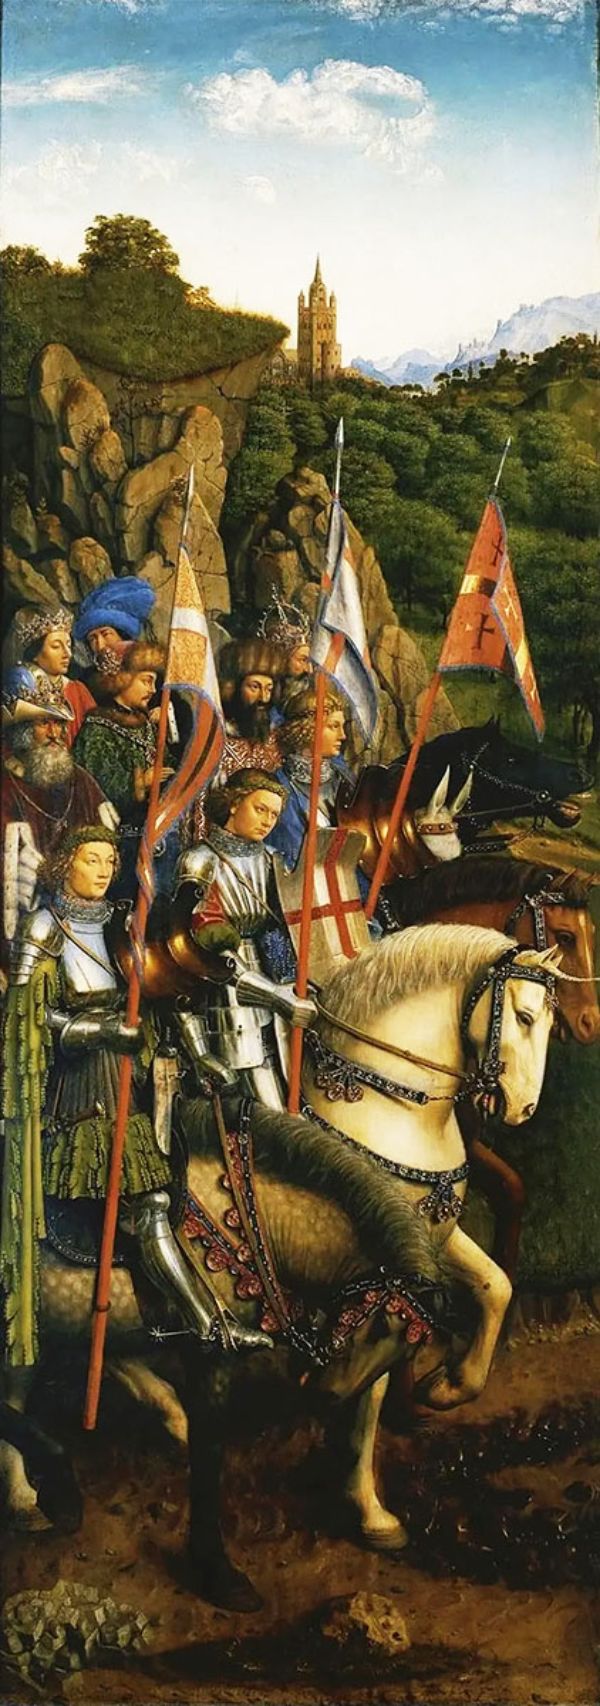 The Soldiers of Christ 1430 by Jan van Eyck | Oil Painting Reproduction